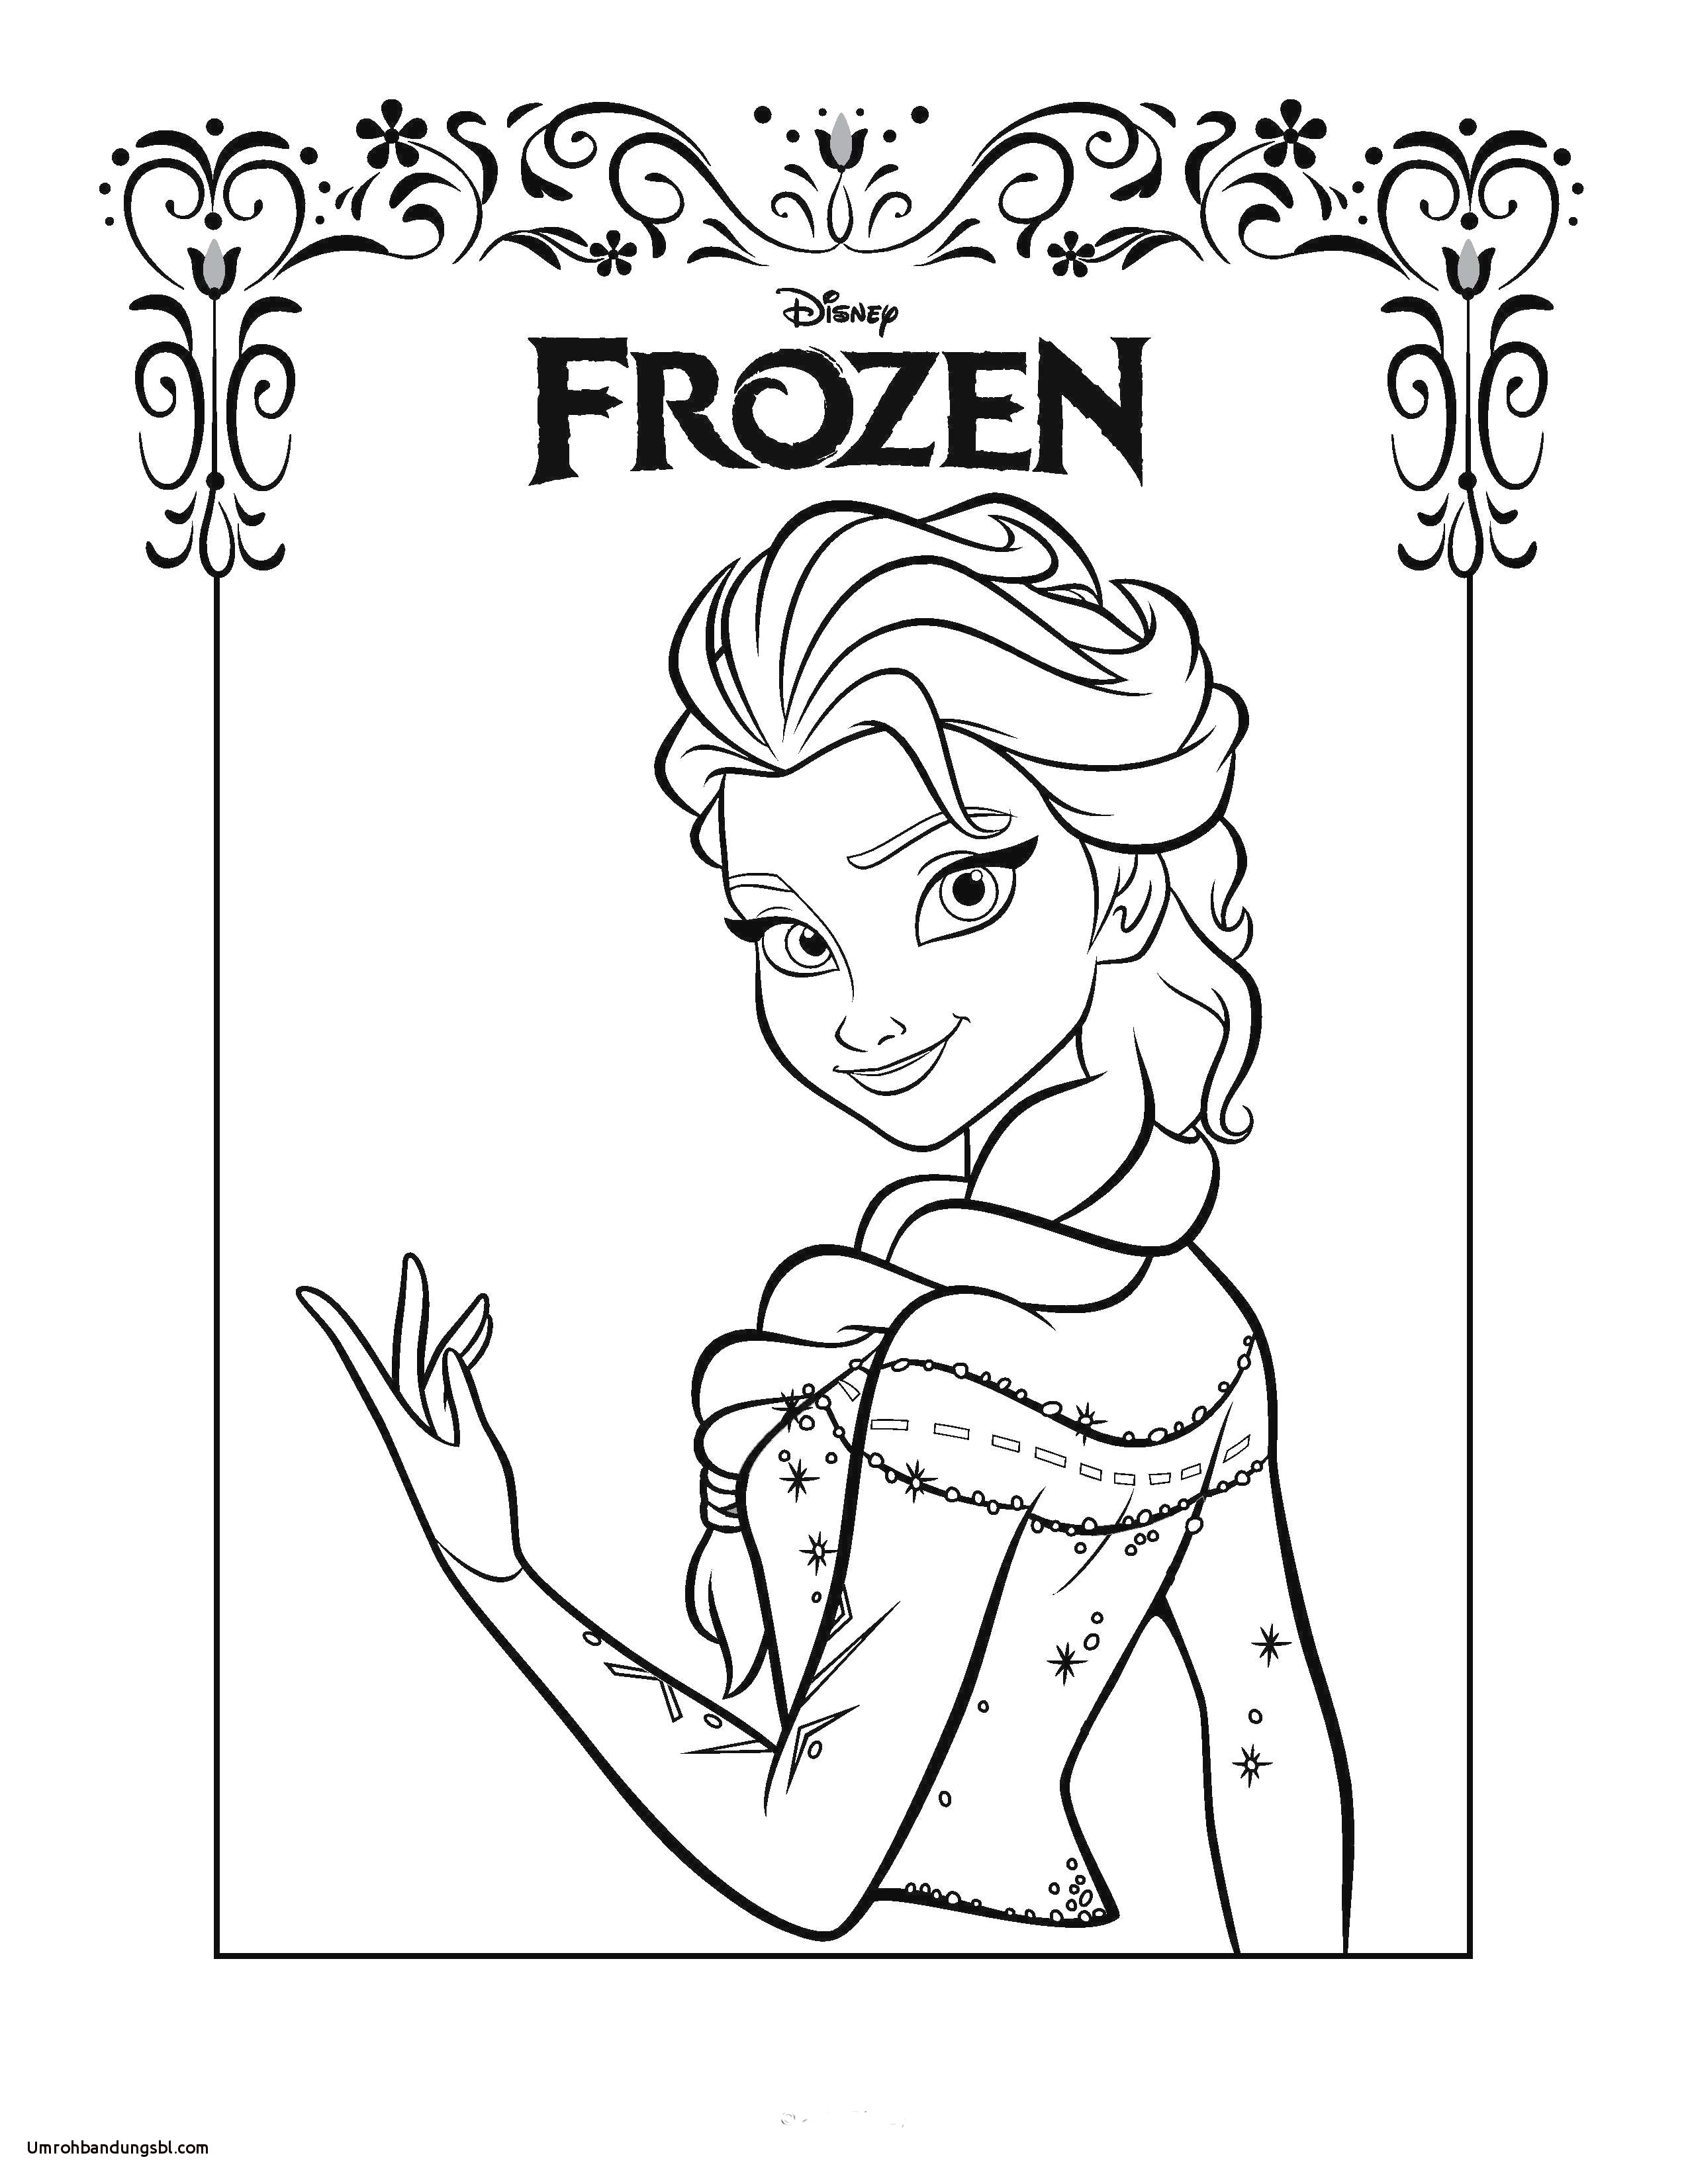 Coloring Pages For Girls Frozen 10 Frozen Coloring Book Pages To Print Umrohbandungsbl